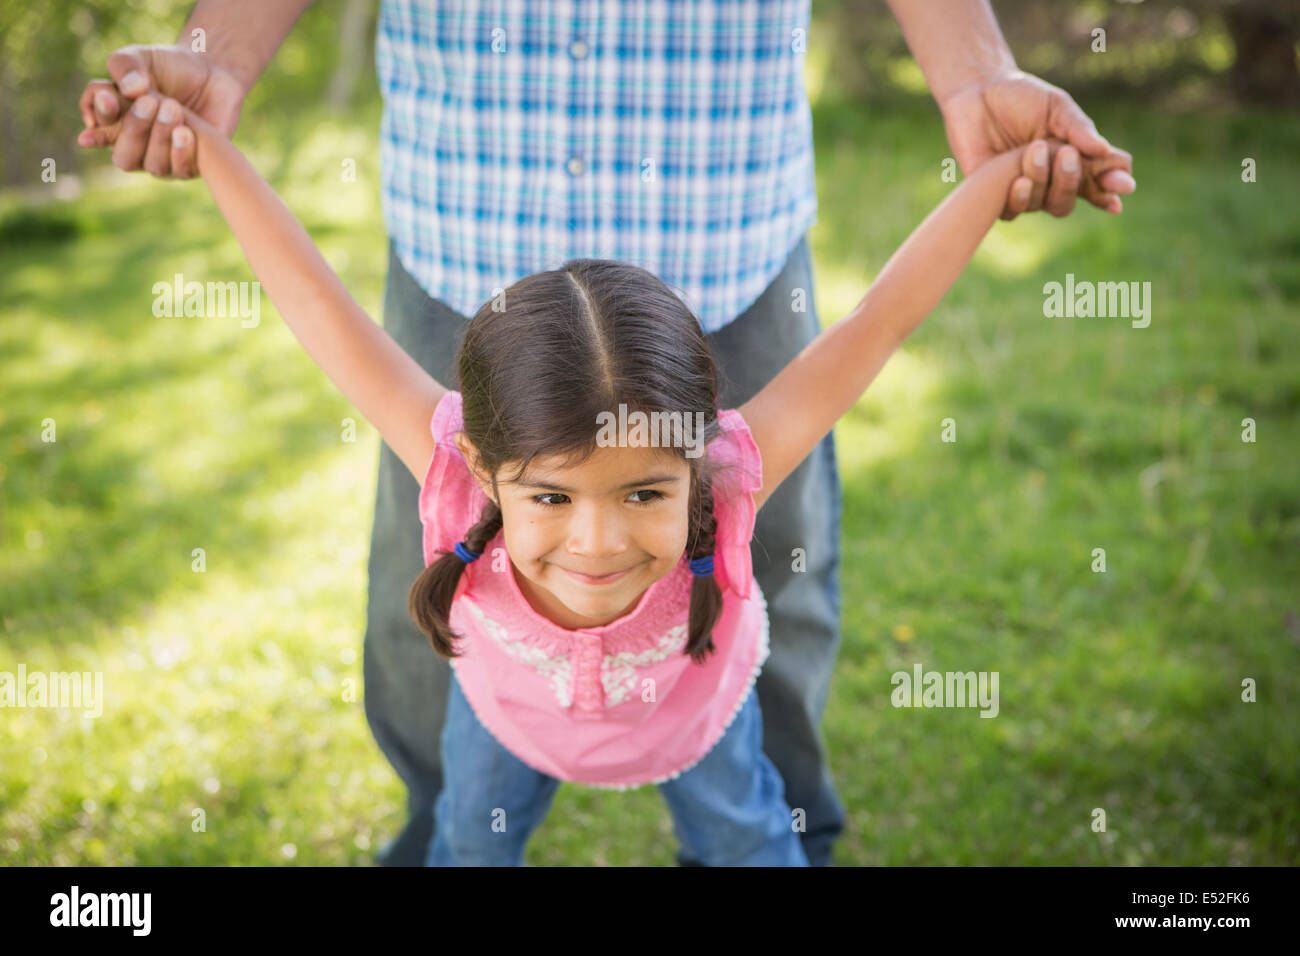 A young child in a pink dress with her arms outstretched playing with her father. Stock Photo